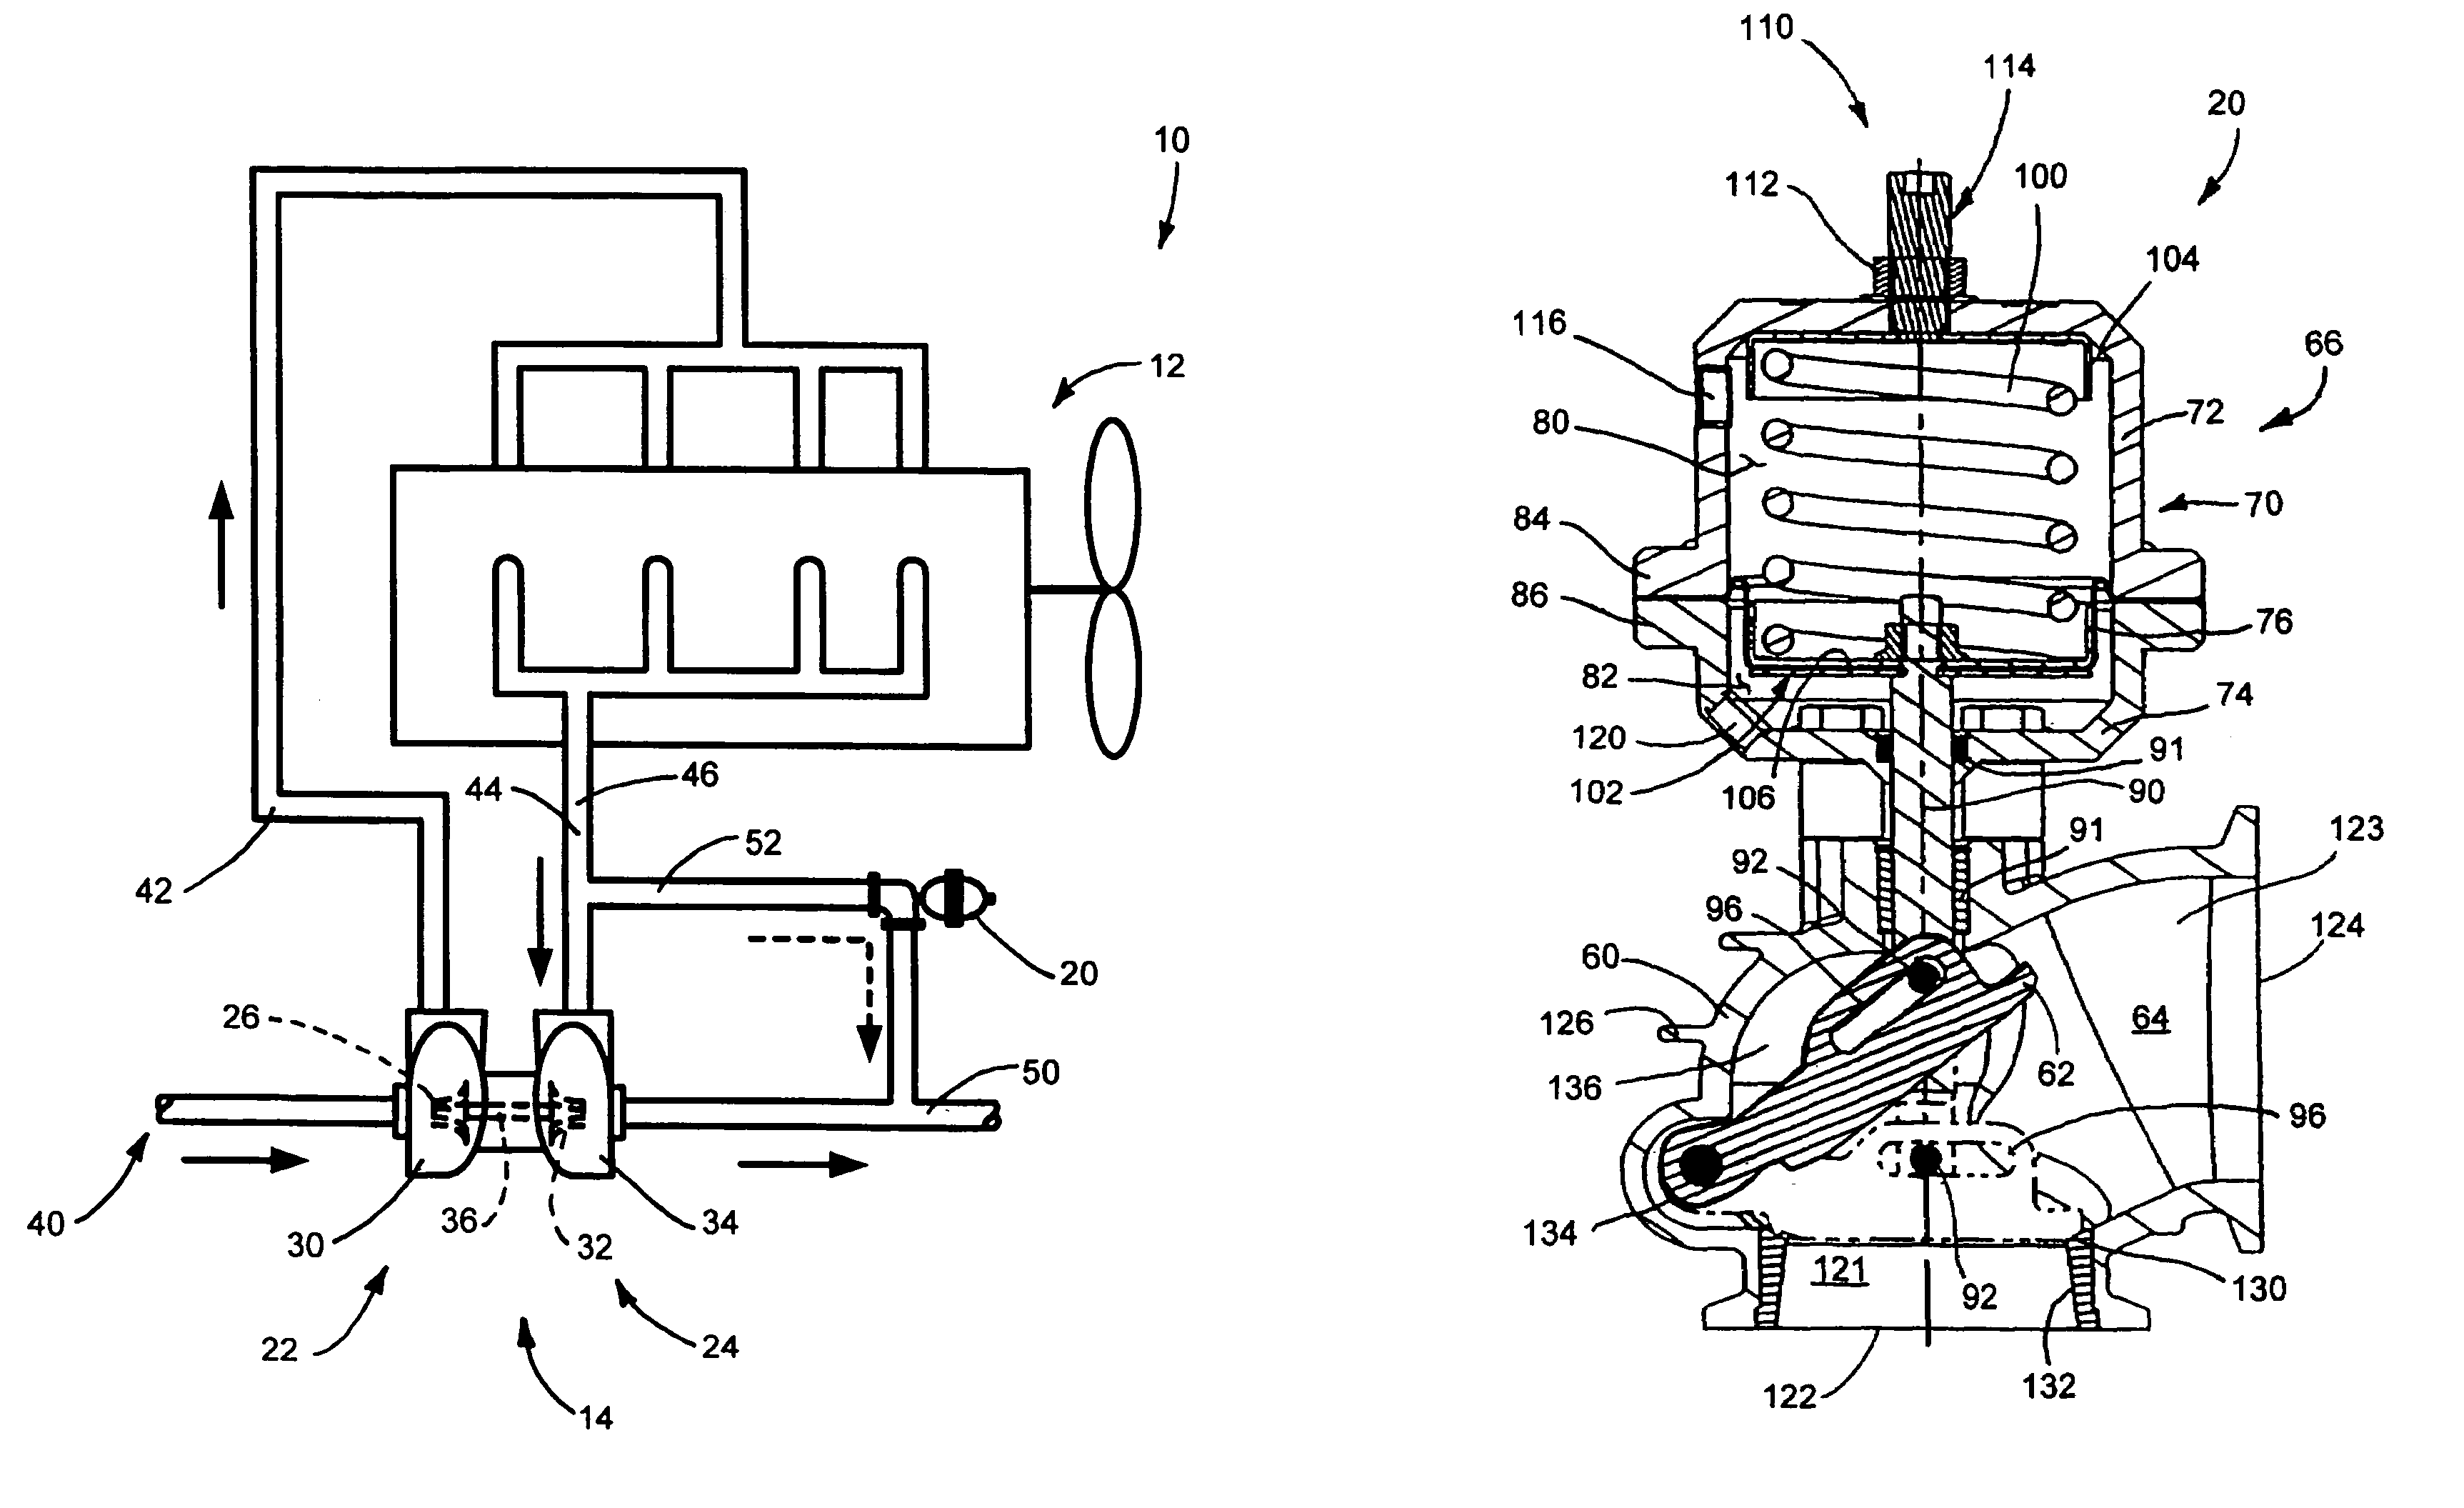 Wastegate for a turbocharged internal combustion engine